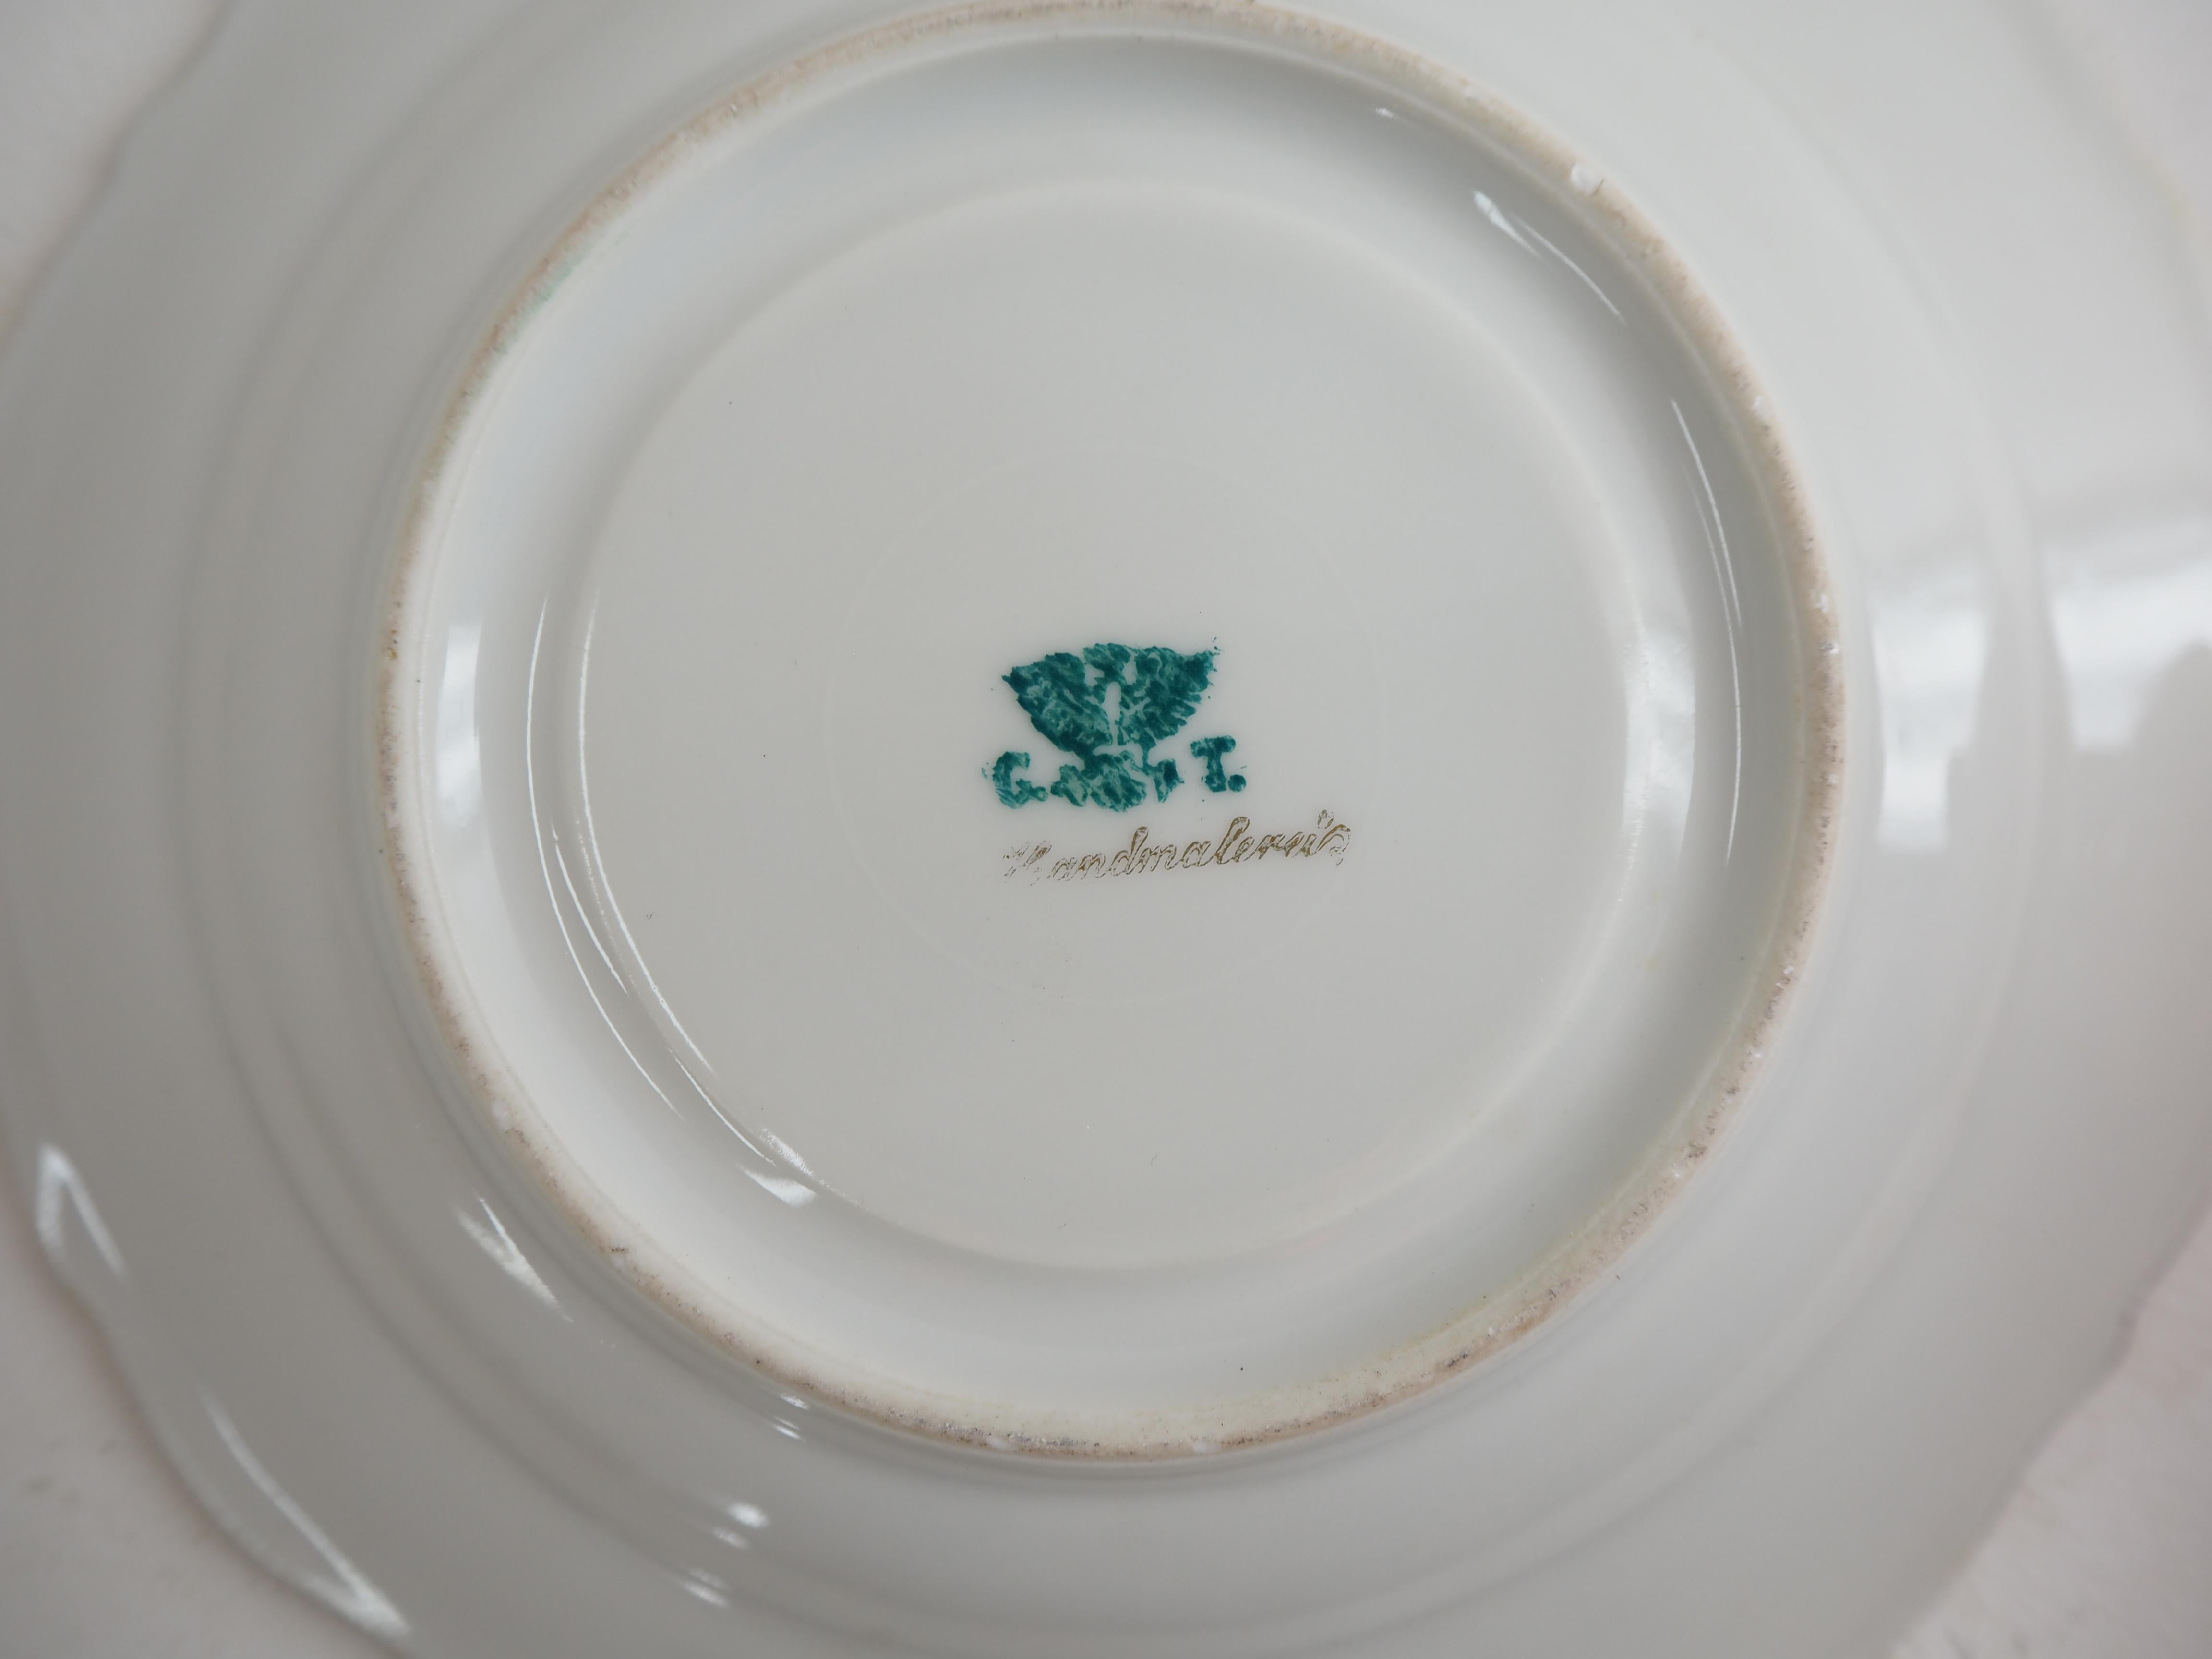 Carlsbad Breakfast Porcelain Coffee Cup, 1910 For Sale 4